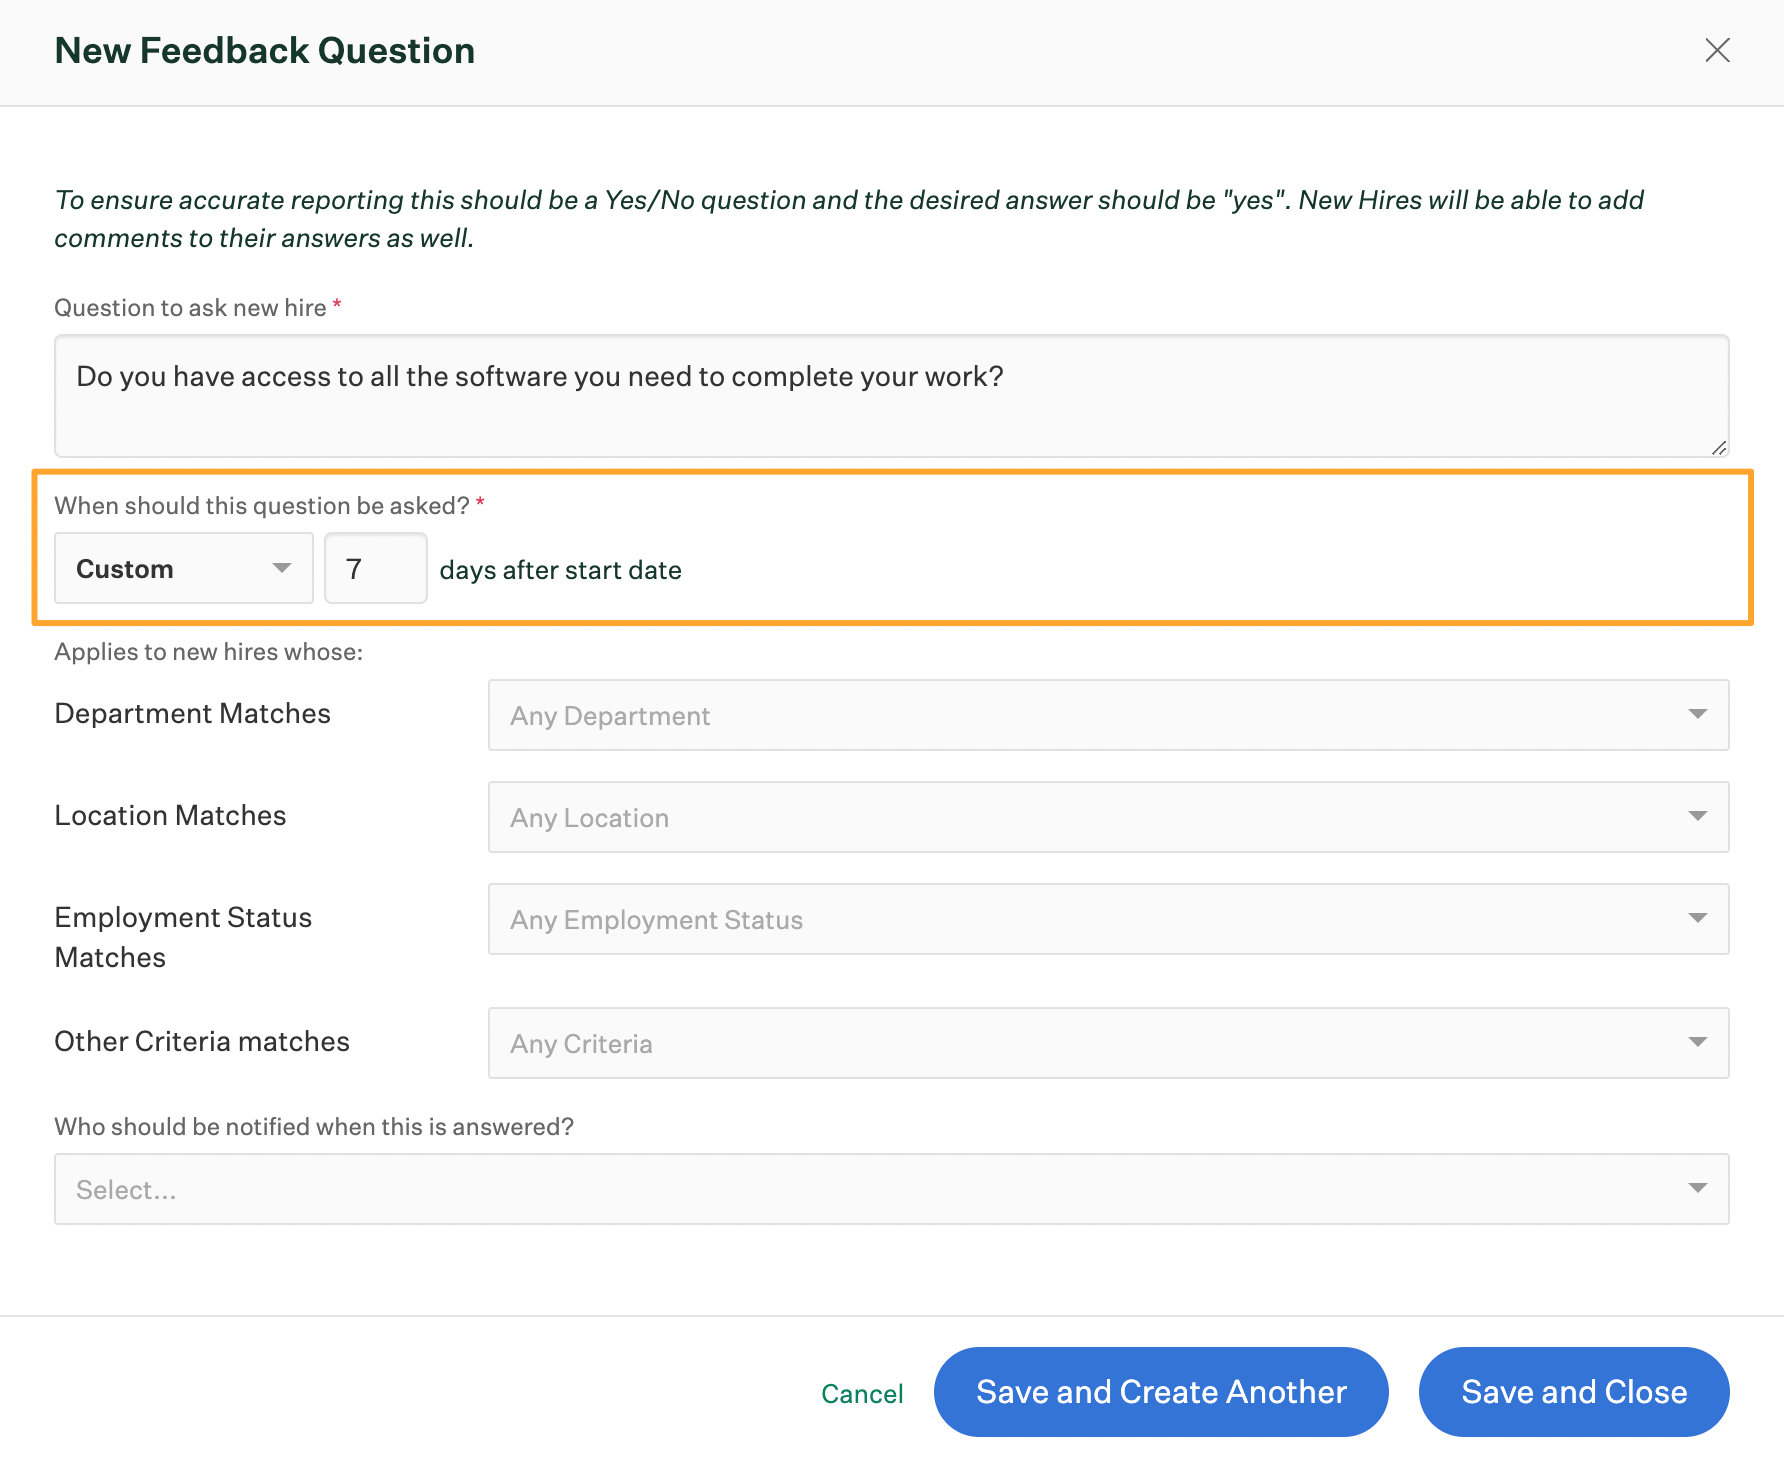 Create-new-feedback-question-window-with-when-should-this-question-be-asked-field-filled-out.png